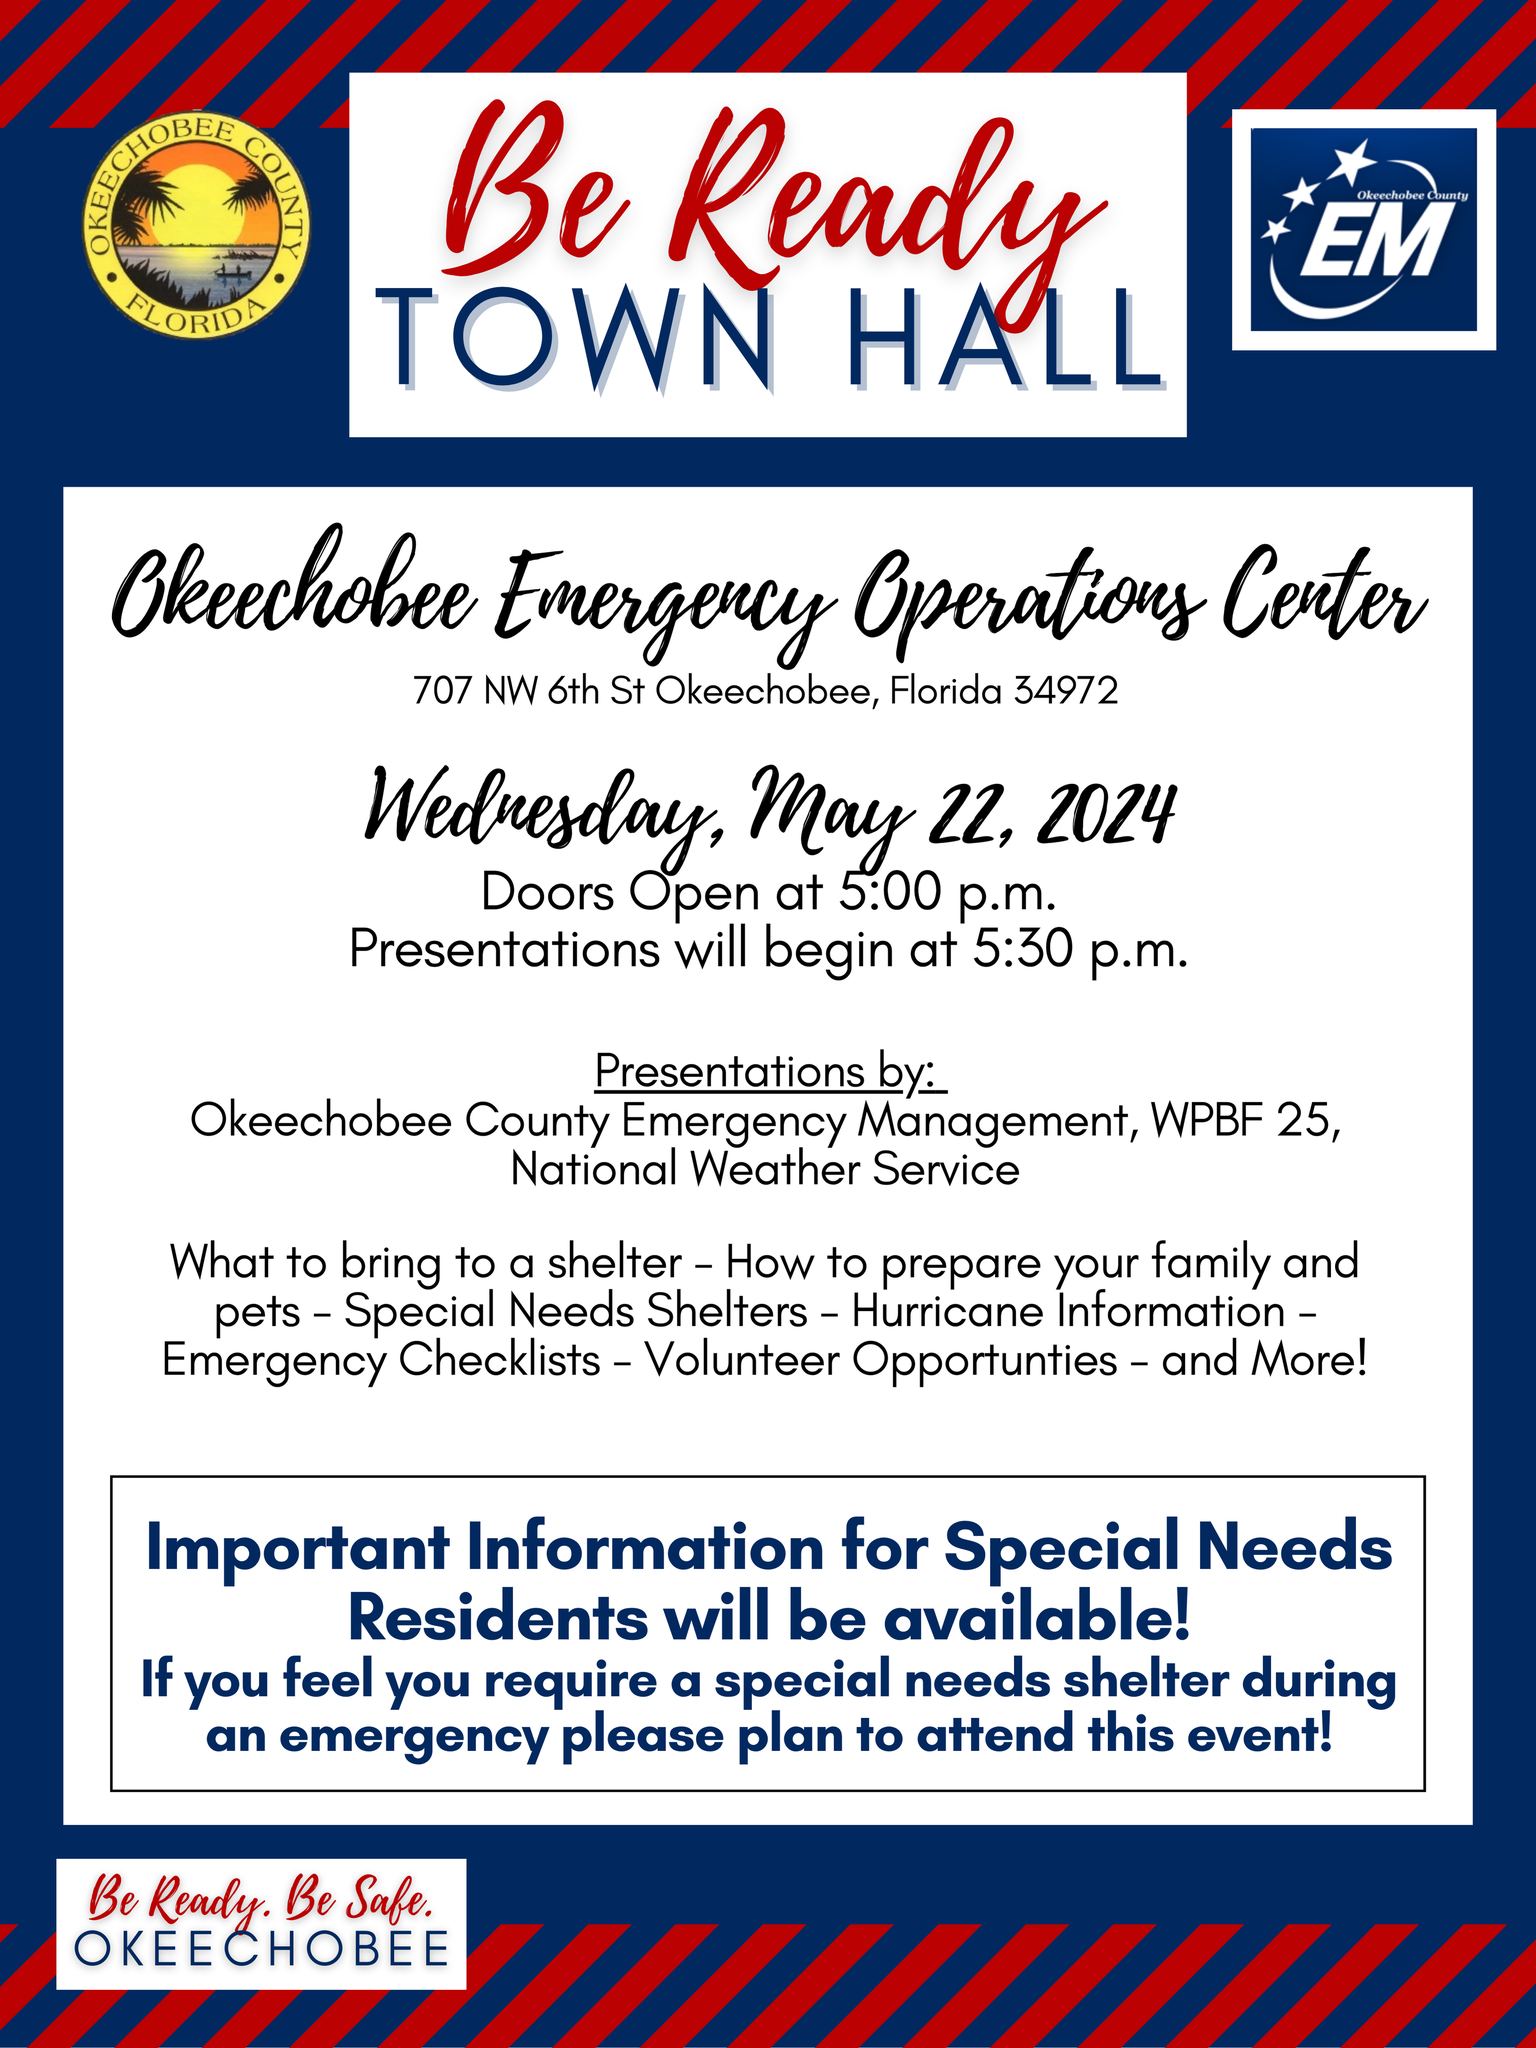 𝗡𝗼𝘁𝗶𝗰𝗲 𝗼𝗳 𝗢𝗸𝗲𝗲𝗰𝗵𝗼𝗯𝗲𝗲 𝗖𝗼𝘂𝗻𝘁𝘆's Annual "Be Ready Town Hall" Event